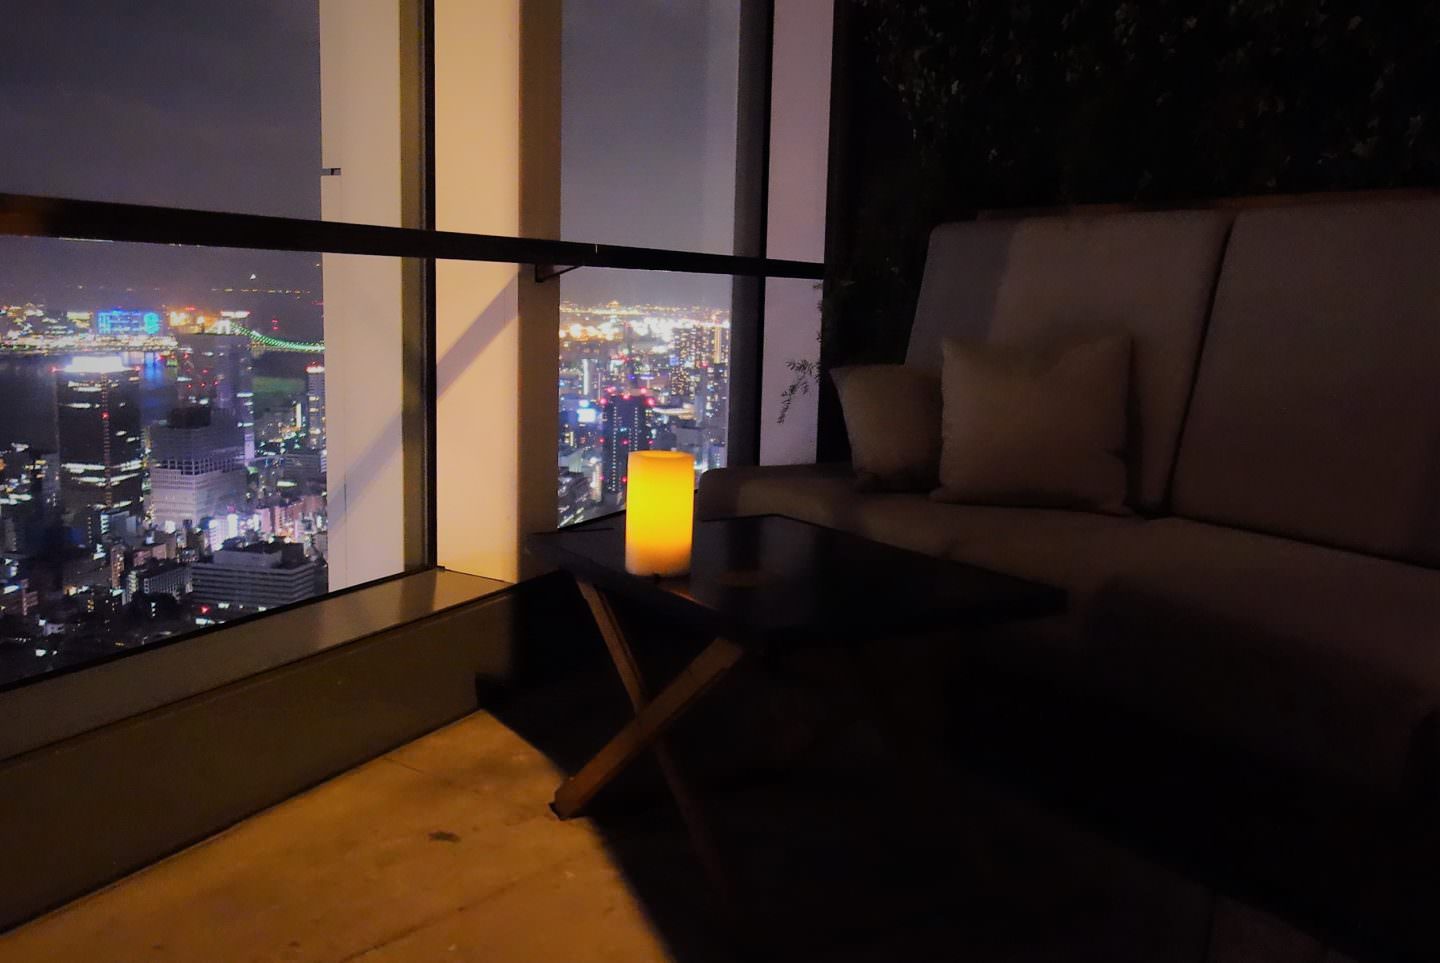 Take in the gorgeous night scenery of Tokyo metropolis at Rooftop Bar, Andaz Tokyo.